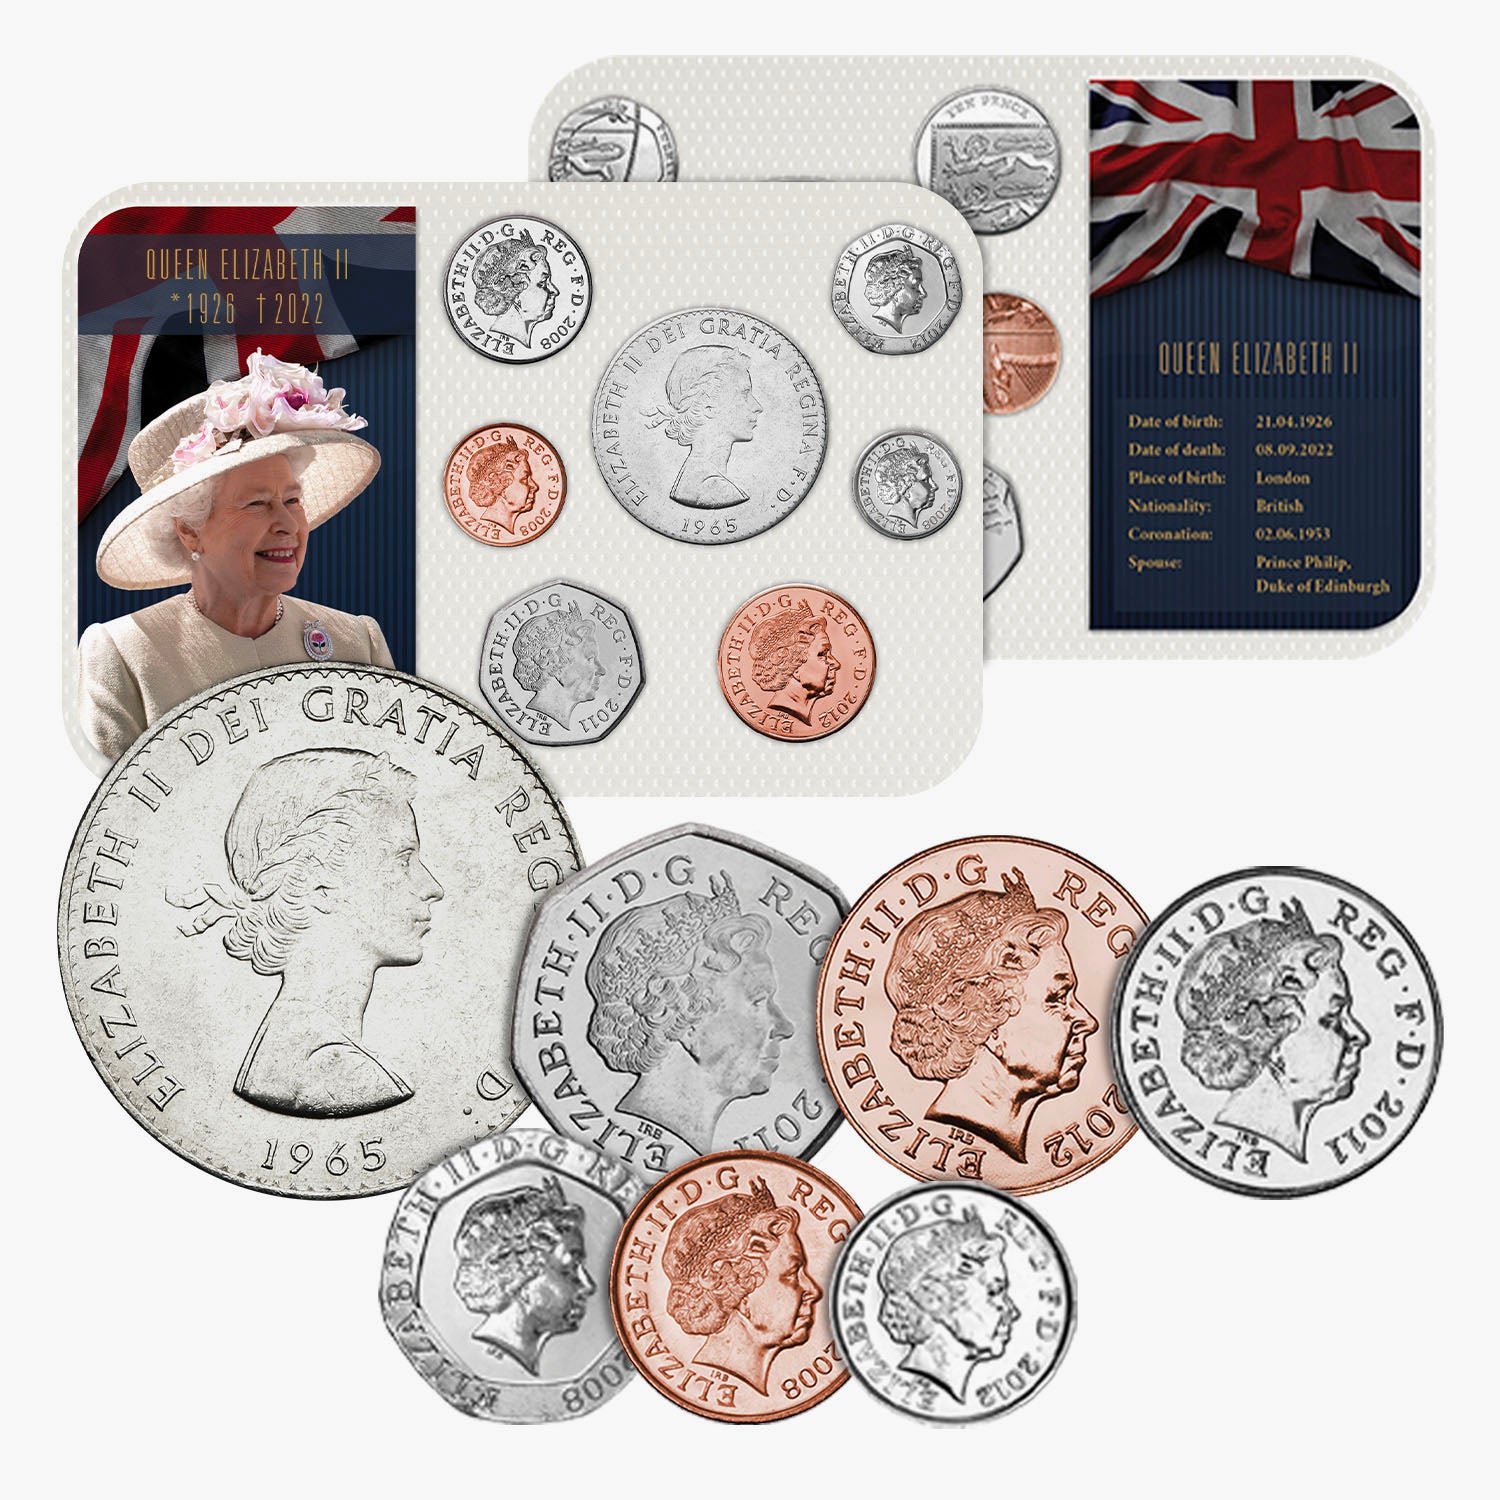 Her Majesty Queen Elizabeth II First and Last Portrait Royal Coin Set